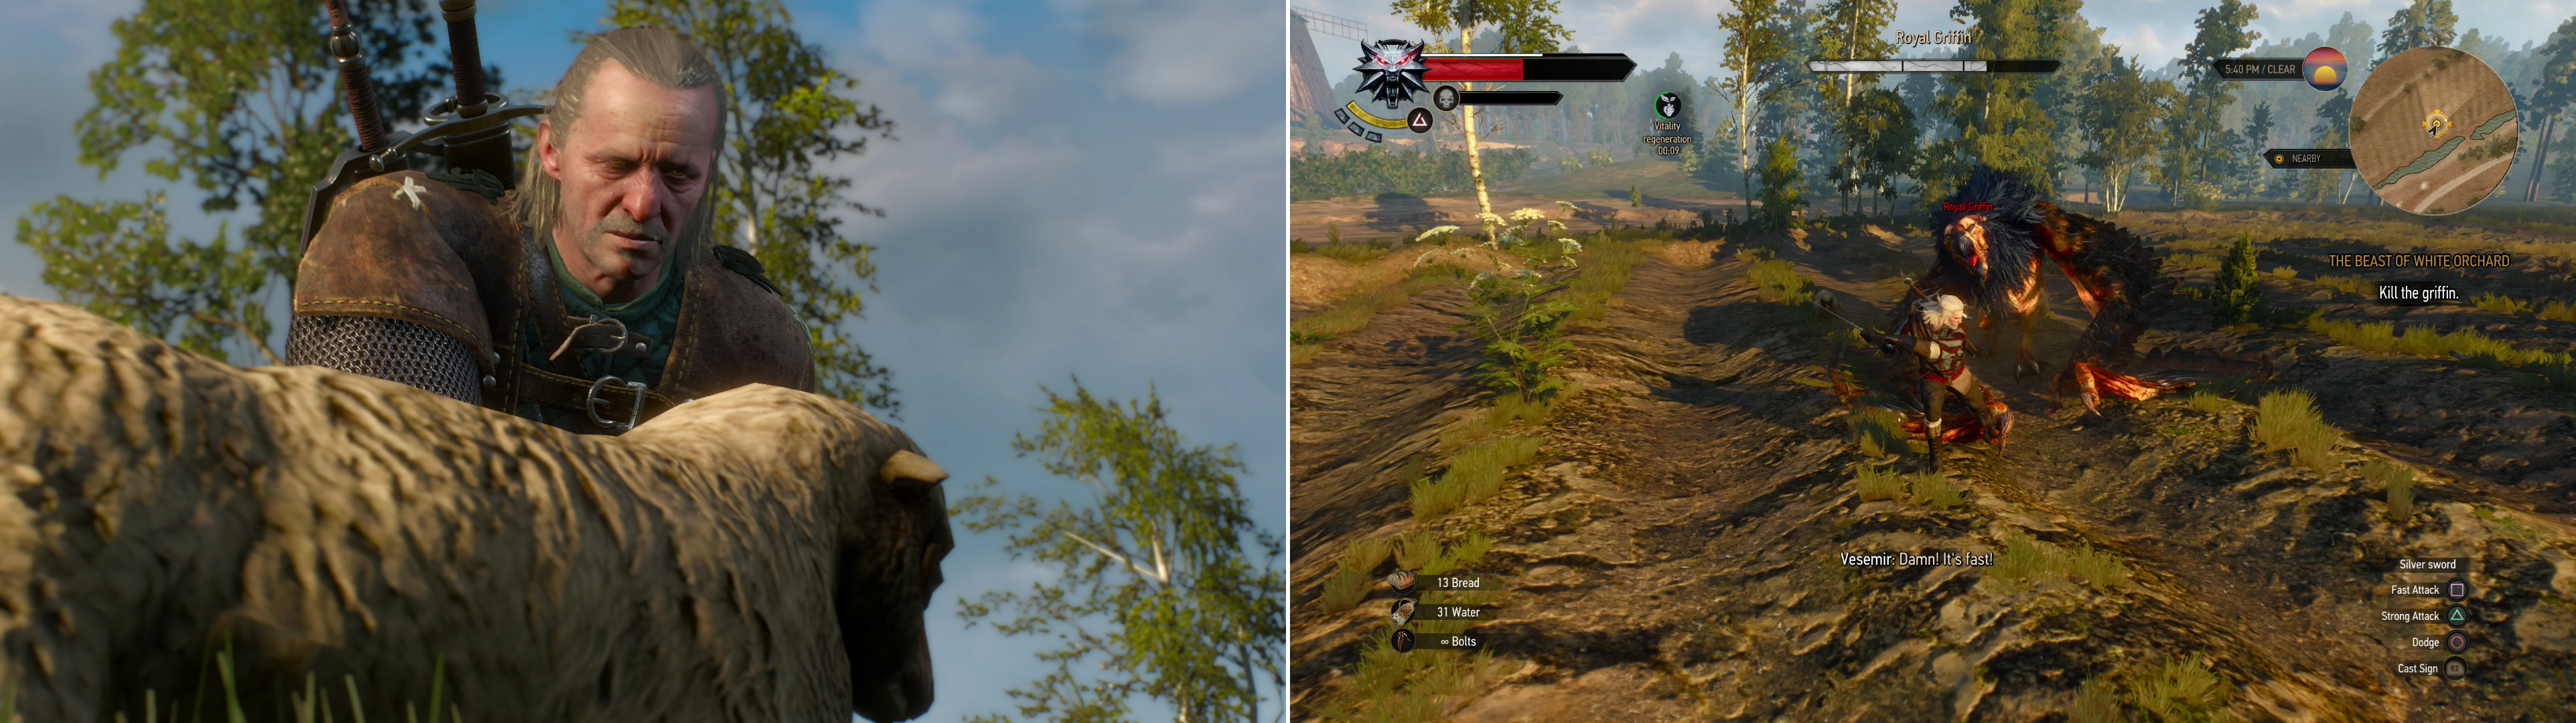 Vesemir uses a clever bit of bait to lure the Griffin (left). When it arrives, attack the Griffin (right).